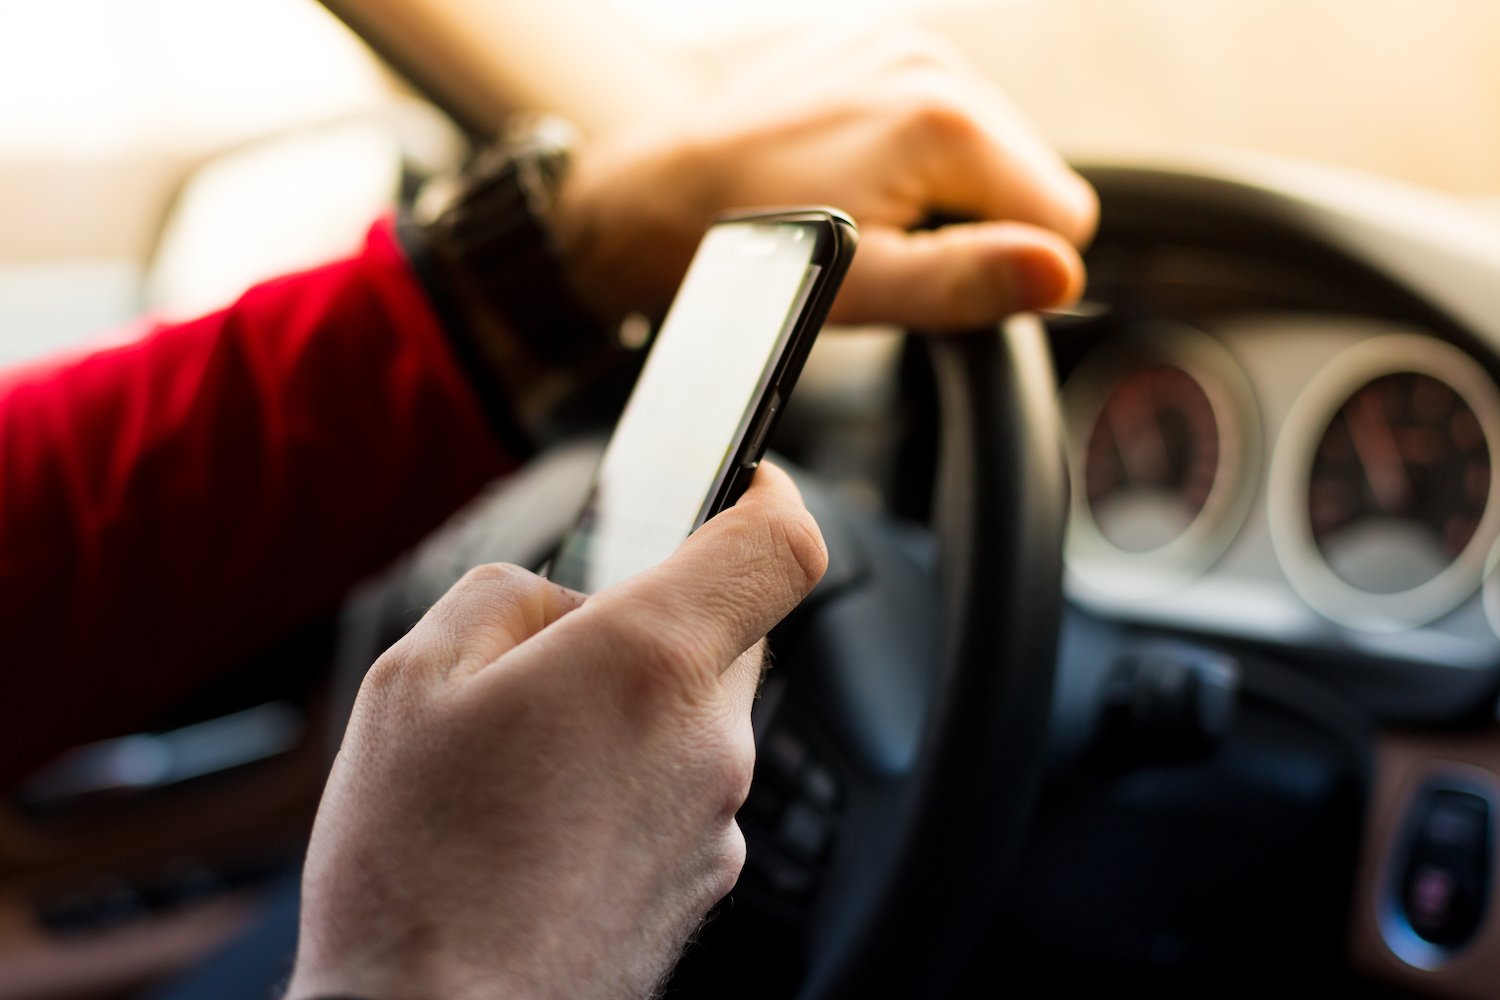 Close up of hand texting while other hand on steering wheel